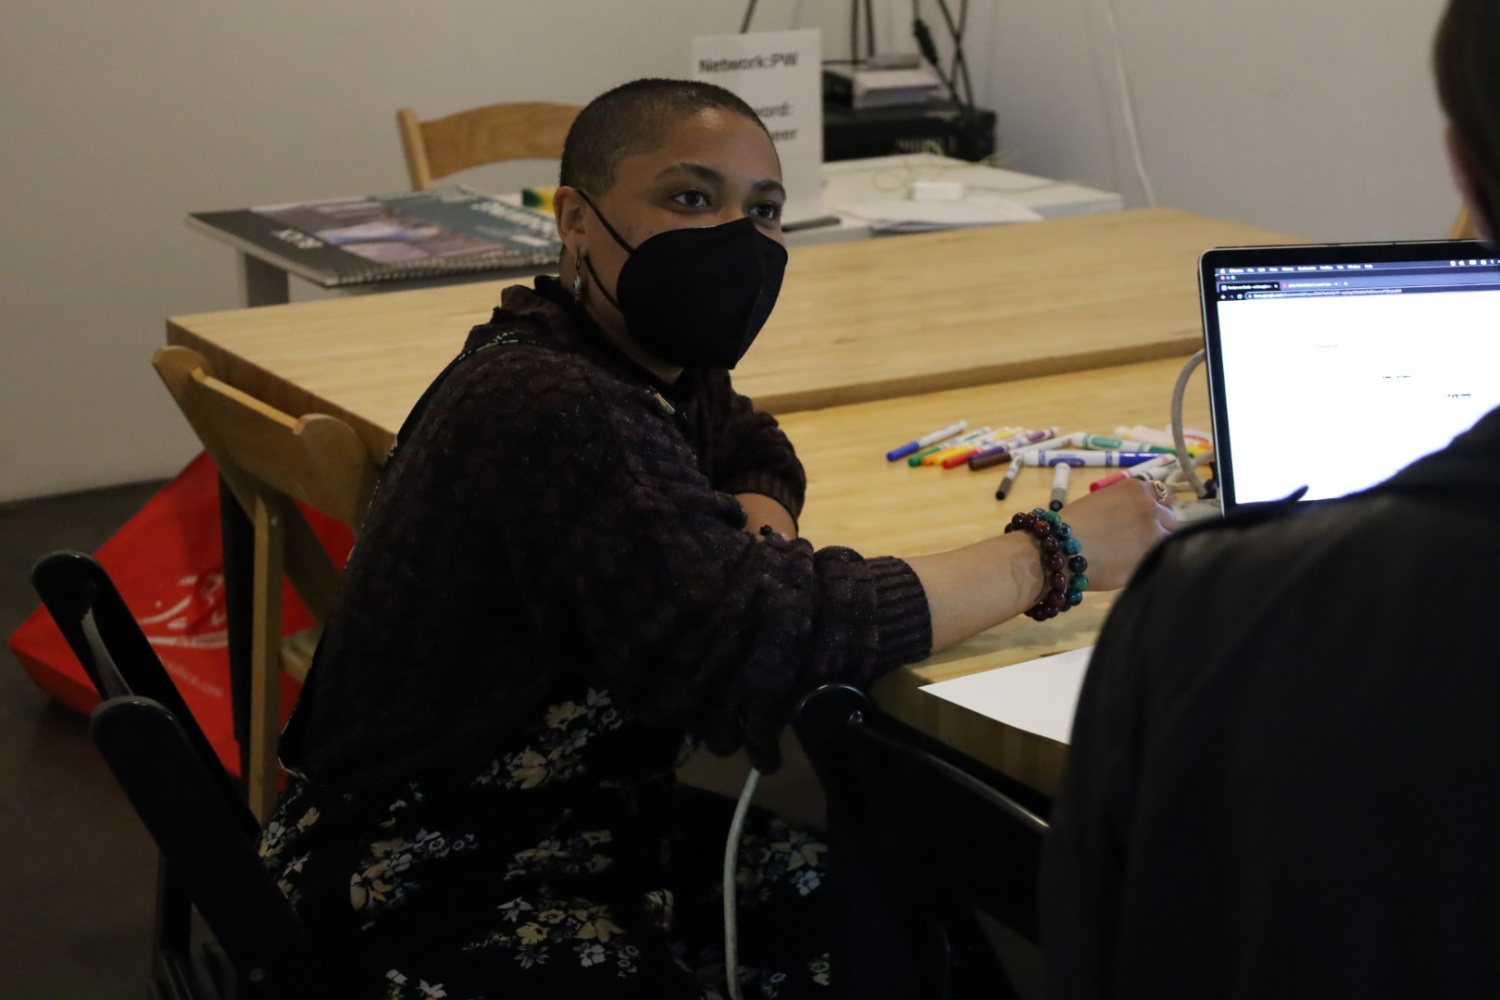 Aiyo O’Connor, who has a shaved head and wears a black mask, a thick sweater and a loose overall with floral patterns, is engaging with a workshop participant off camera. There are a bunch of colored markers on the table.